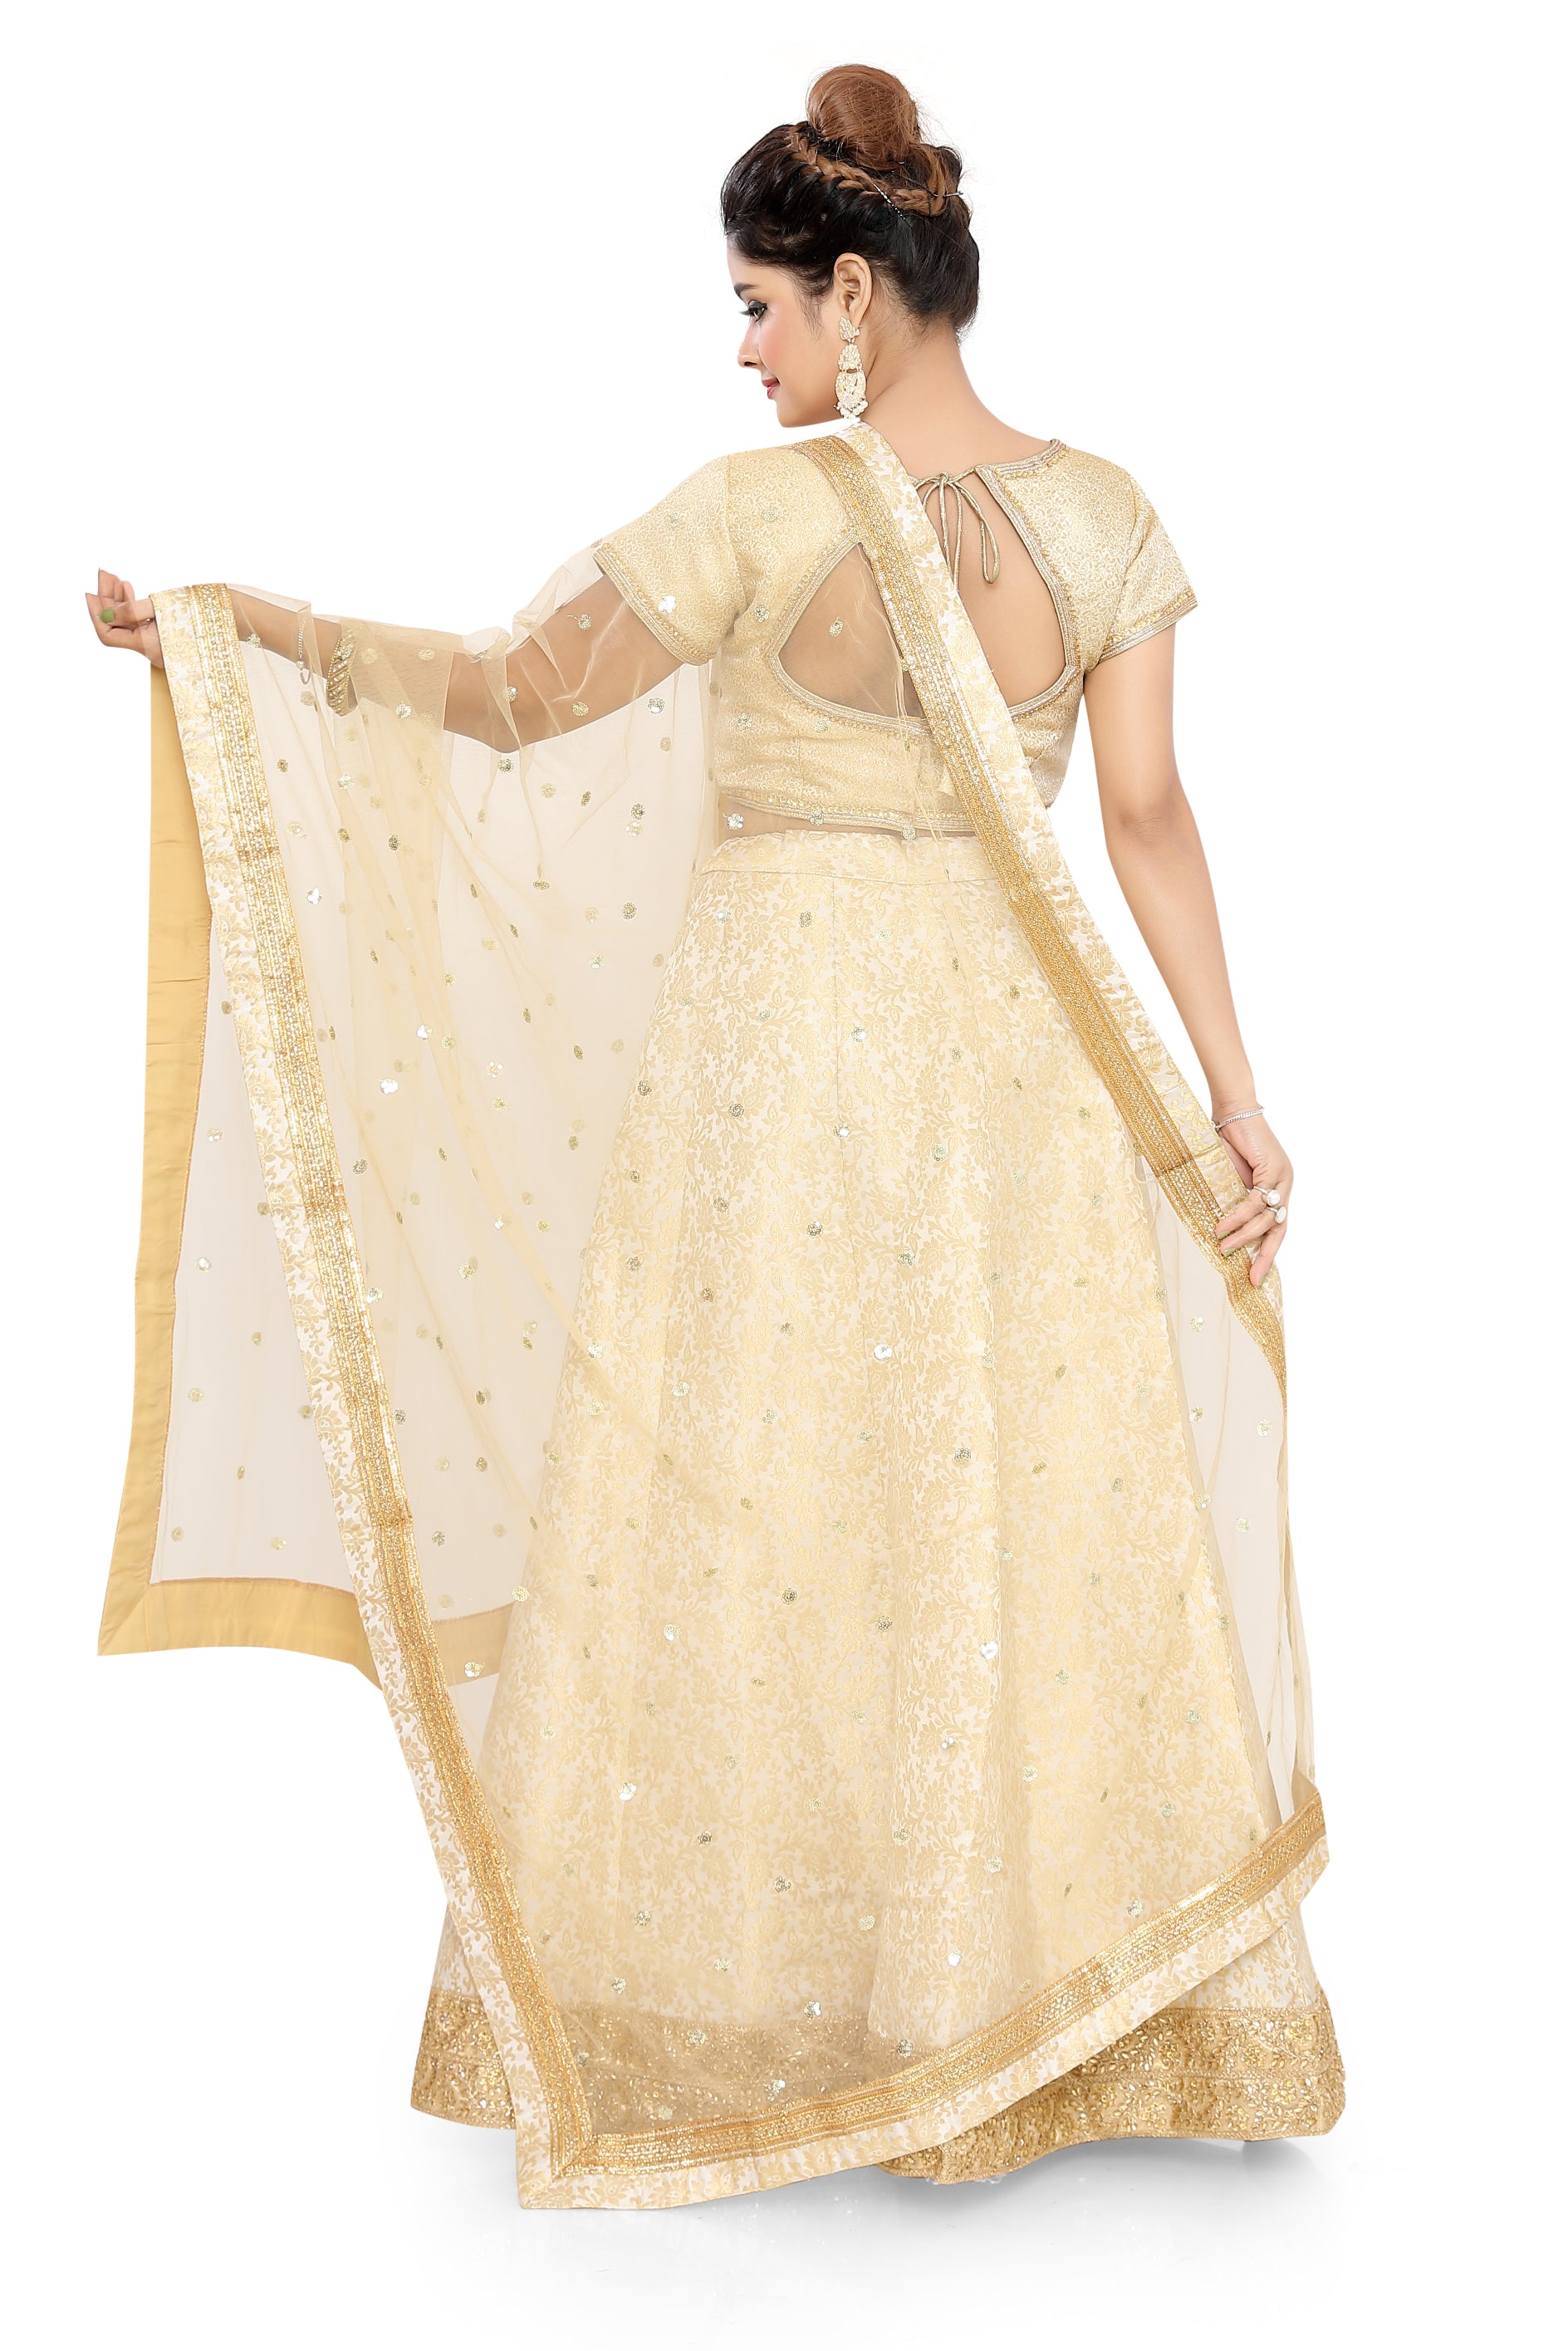 Gold Silk Lehenga Choli - Premium Partywear Lehenga from Dulhan Exclusives - Just $250! Shop now at Dulhan Exclusives